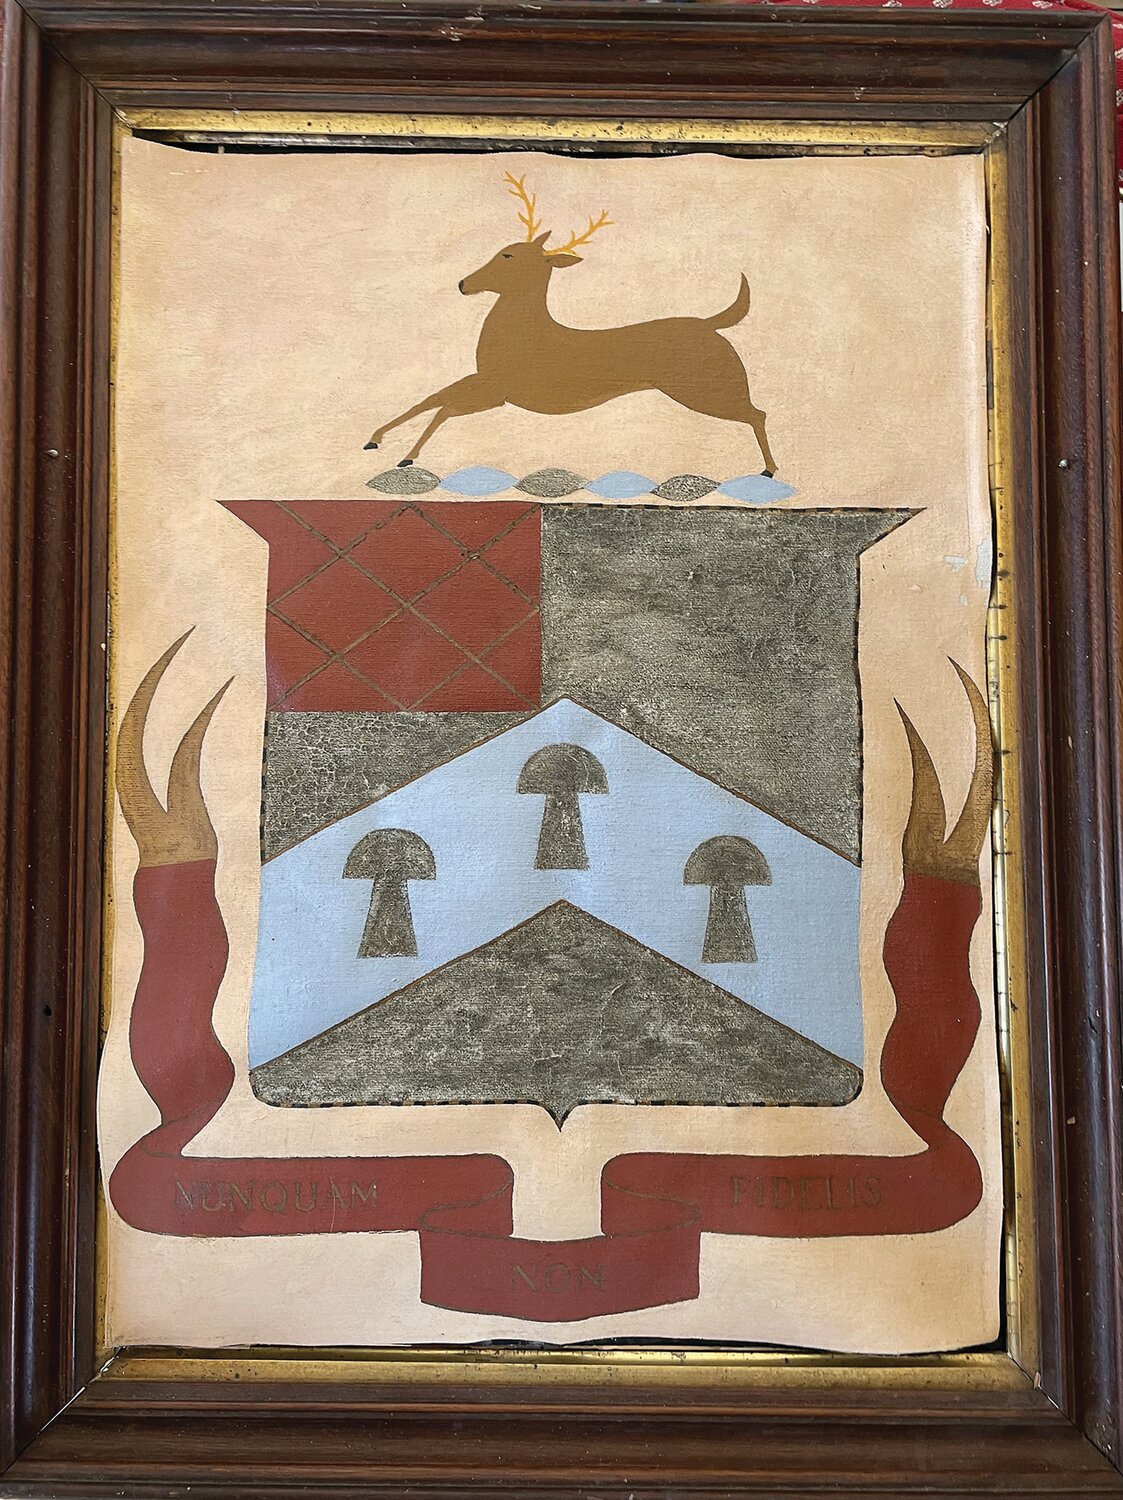 This hand-painted depiction of the Yardley family crest features a buck, haystacks, and the motto — “nunquam non fidelis” meaning “nothing if not faithful.”